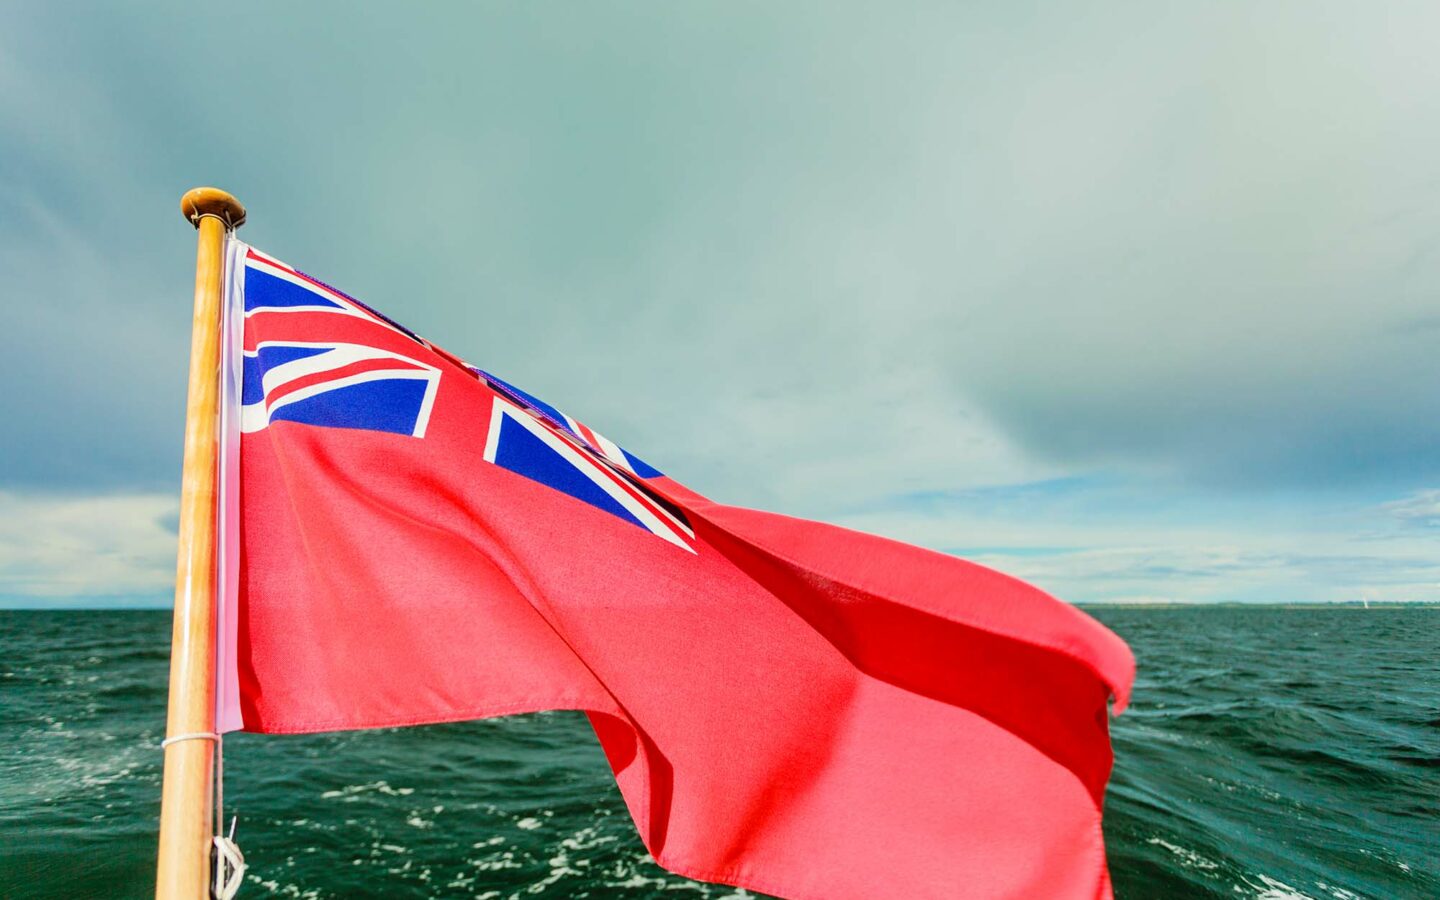 Red ensign flag flying on back of boat over the sea